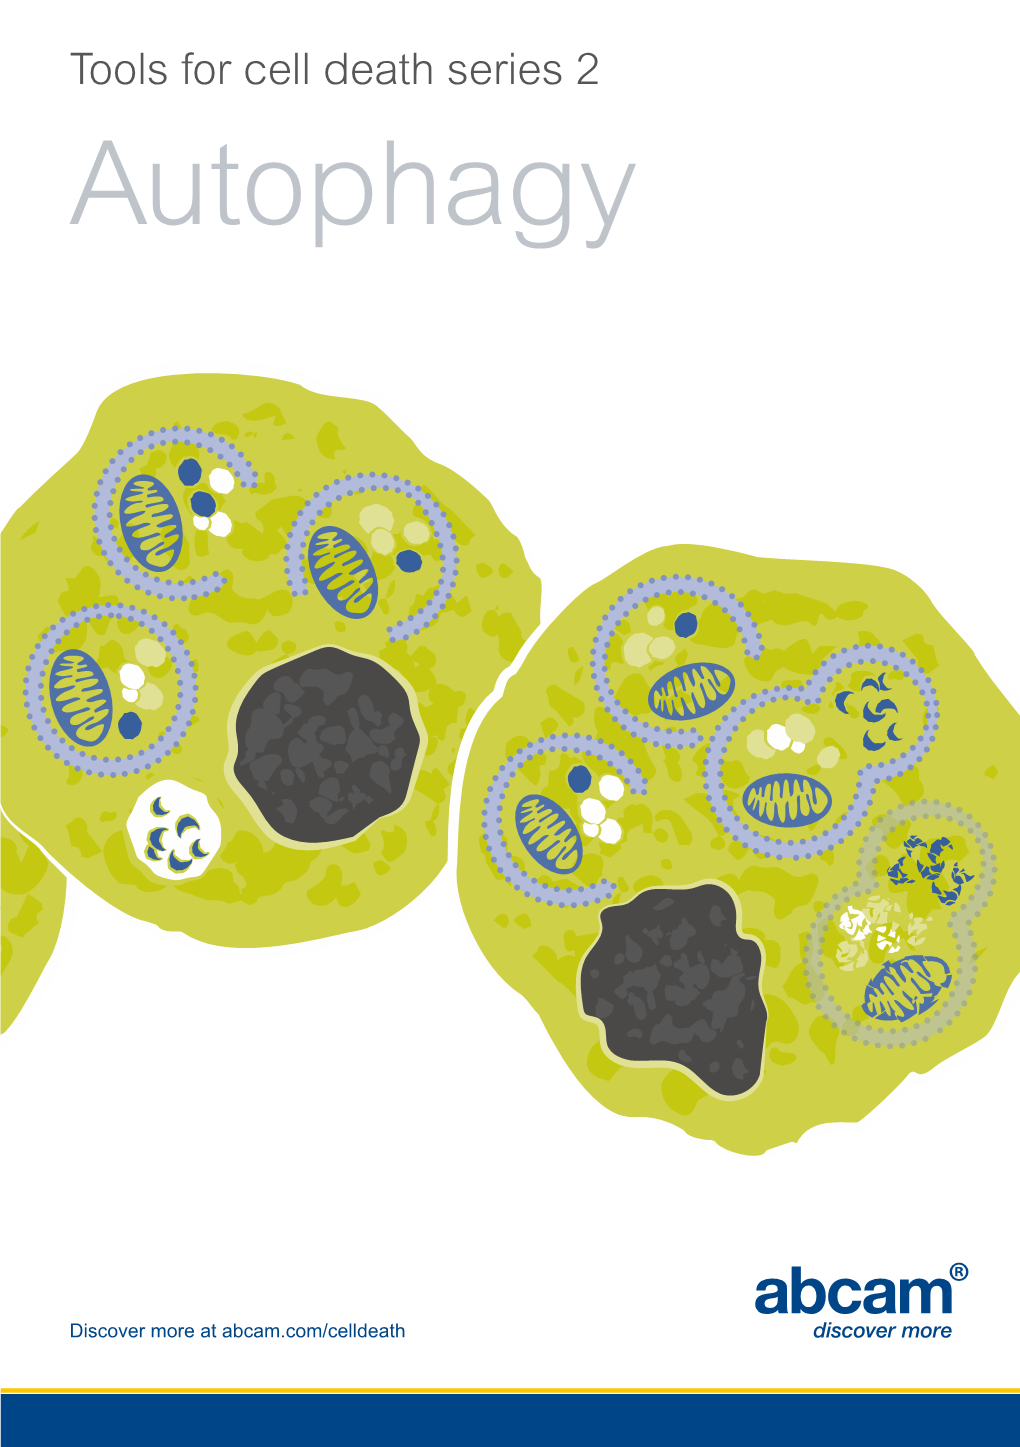 Tools for Cell Death Series 2 Autophagy